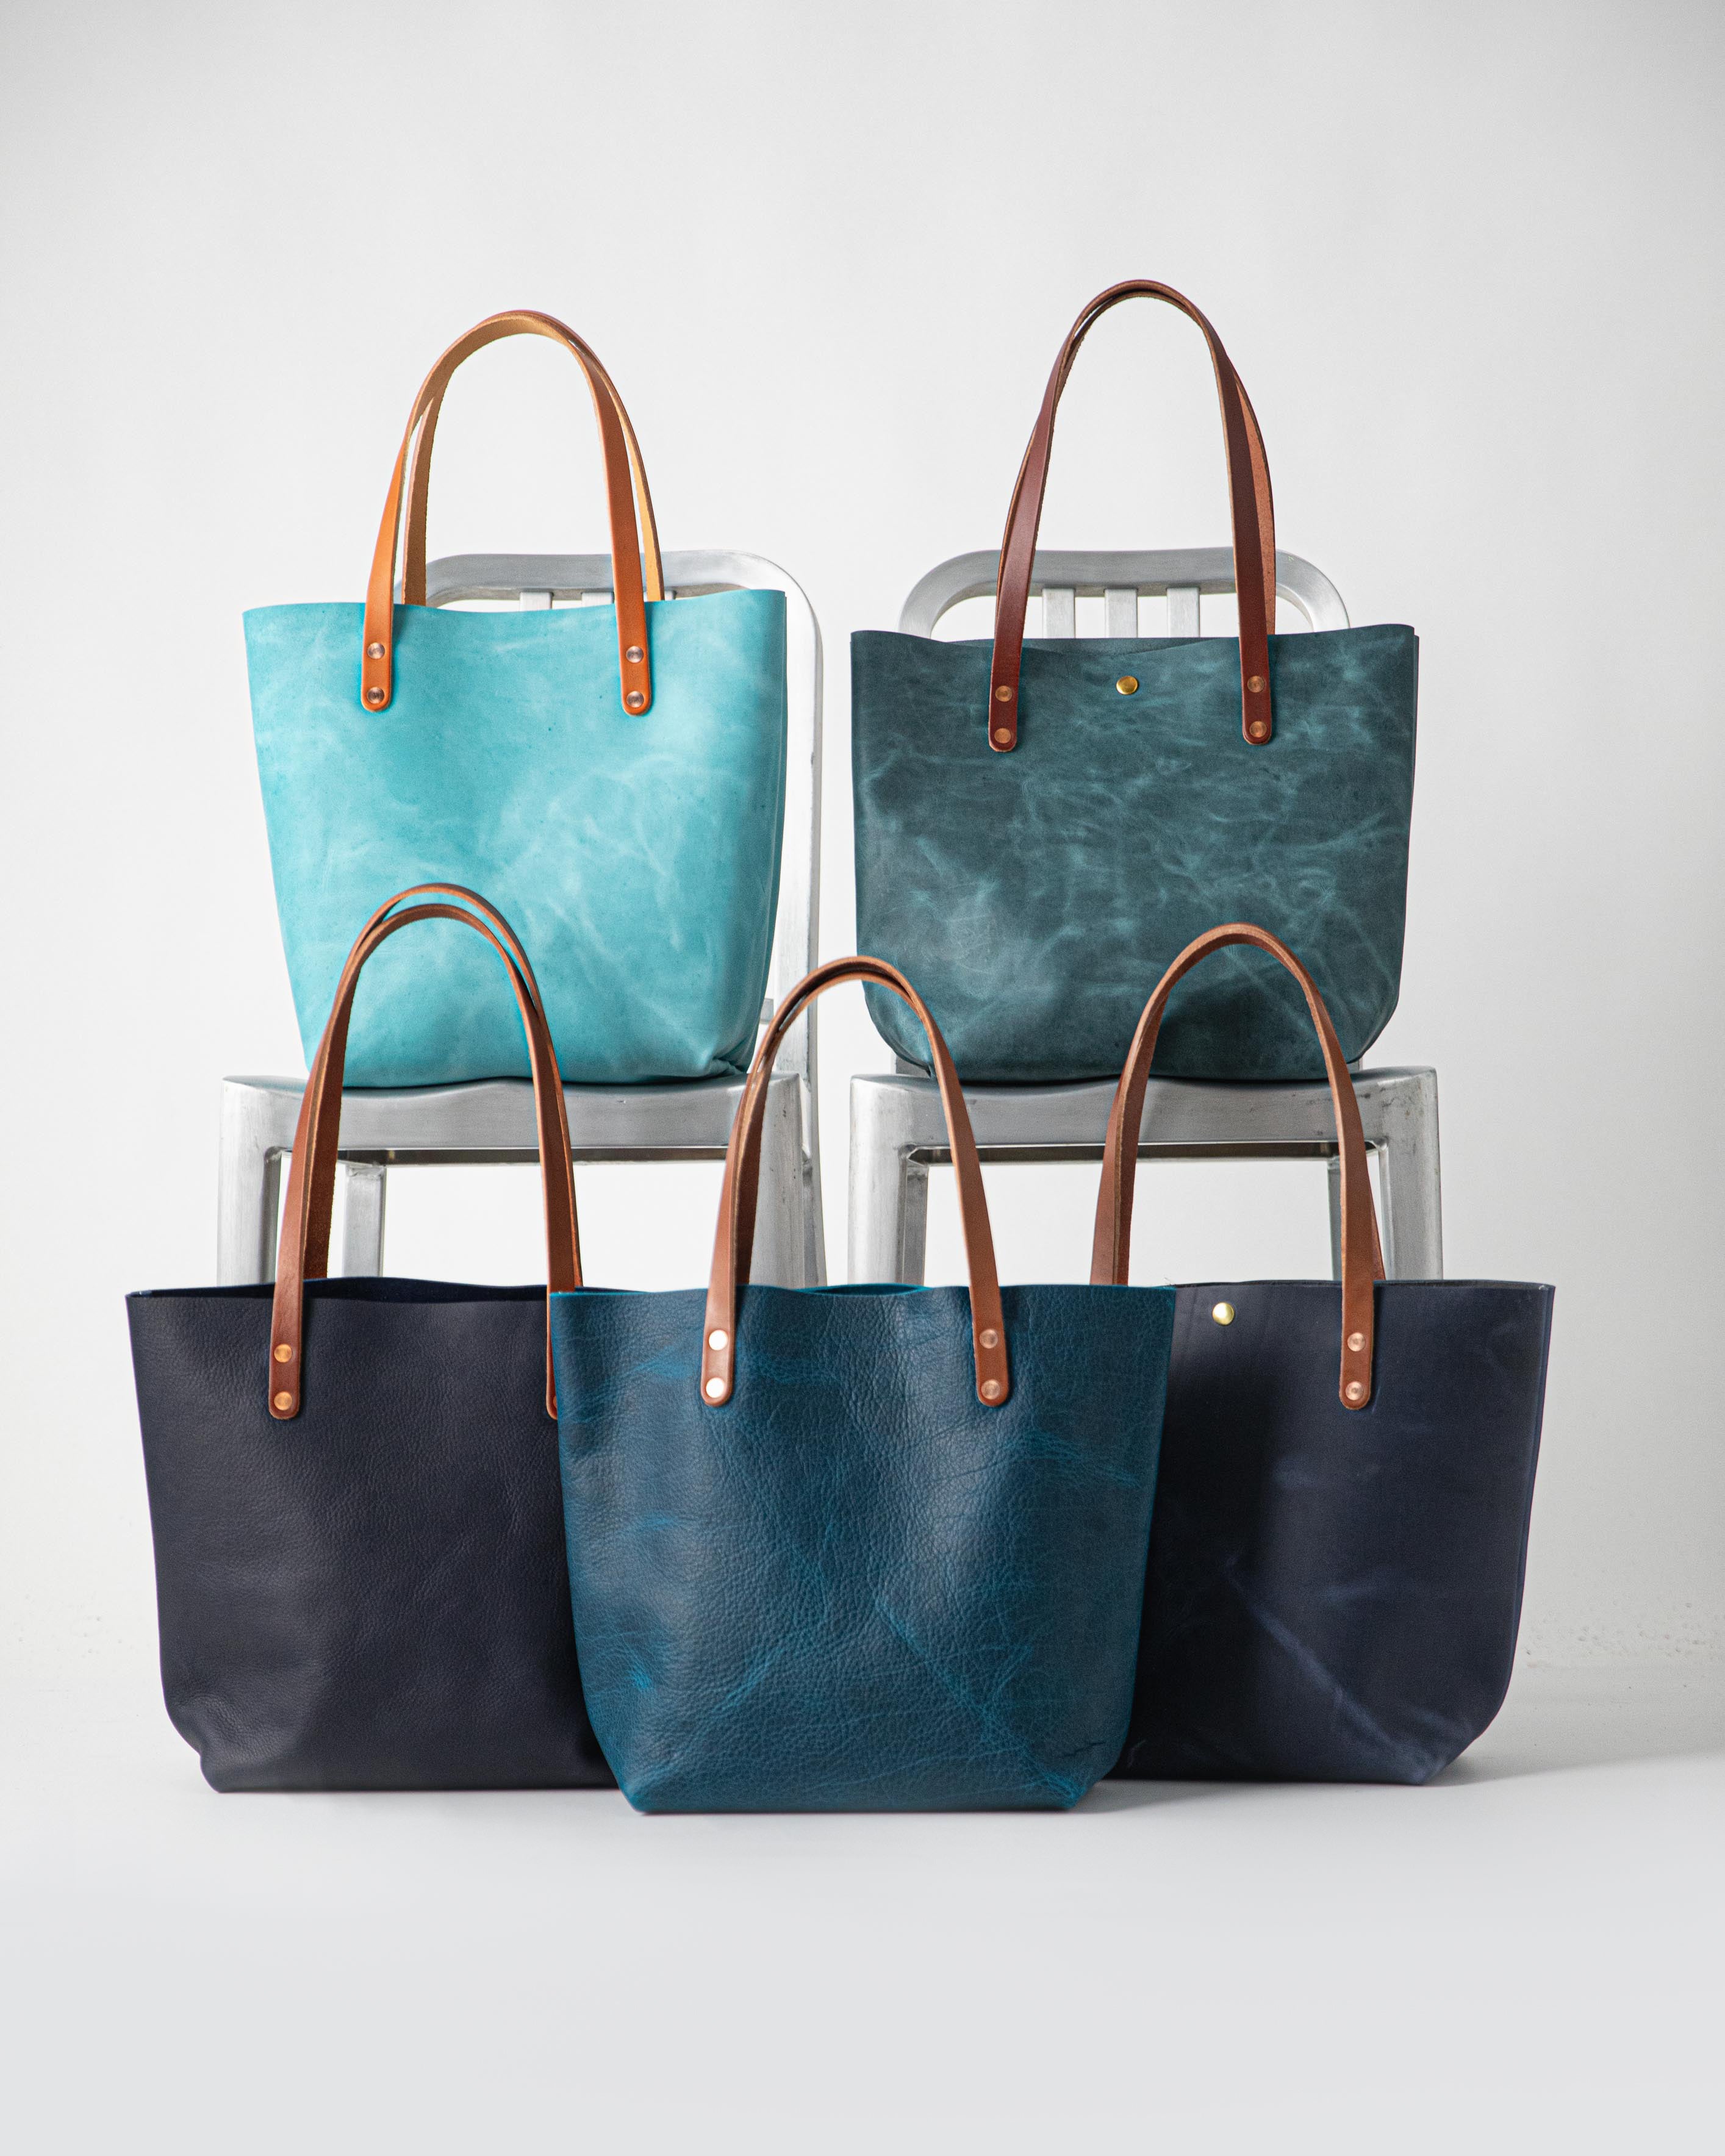 We've Got the Blues! 💙 (All the Blue Totes, That Is)